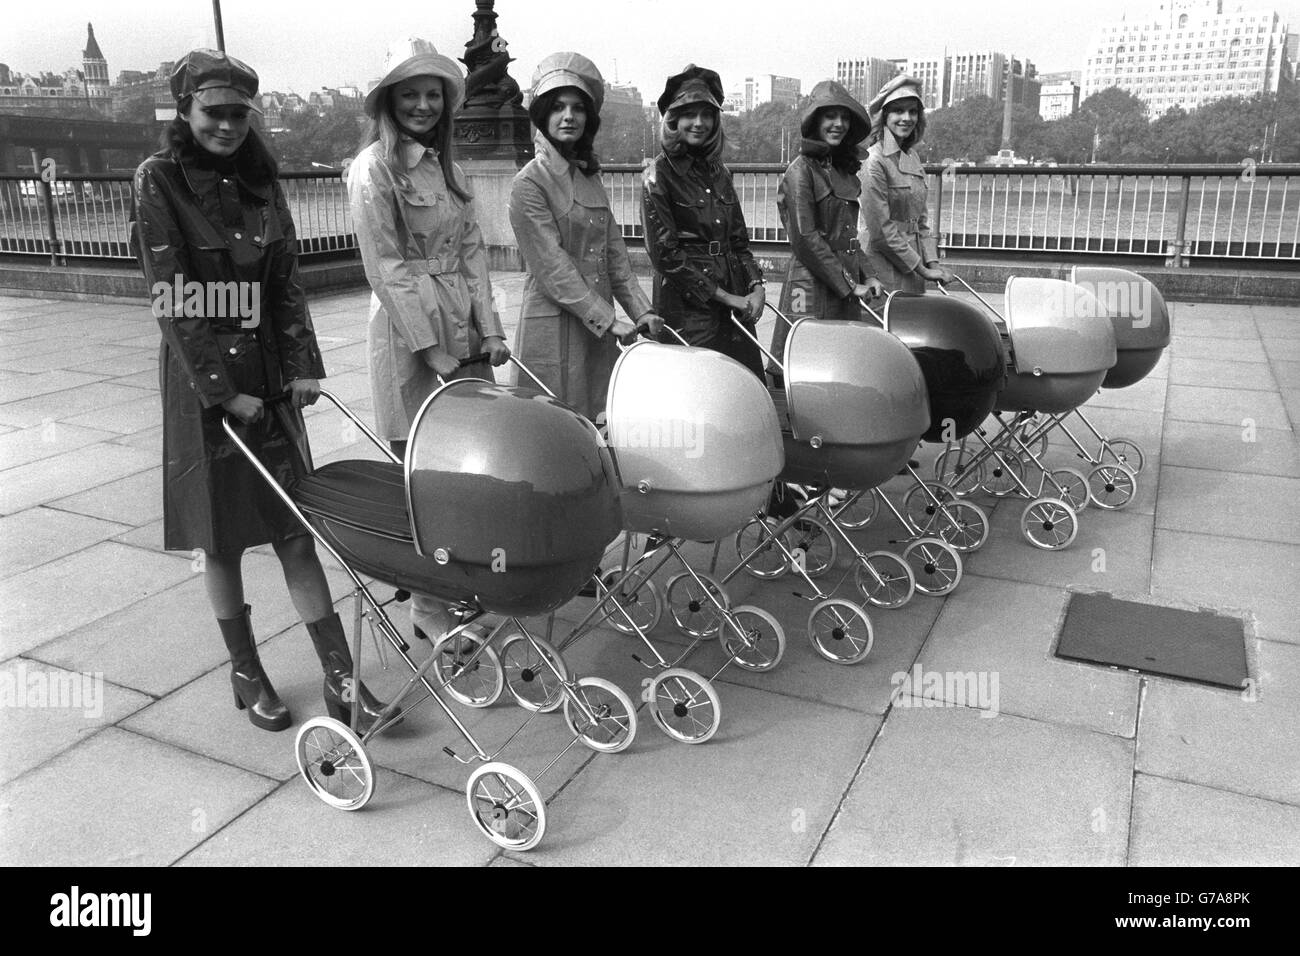 Patterson Edwards Ltd put these latest streamlined oval-shaped prams on parade on the South Bank. Available in six colours, they are expected to boost sales of prams. The prams have been designed to become a fashionable commodity, with lots of colour and eye appeal. Stock Photo